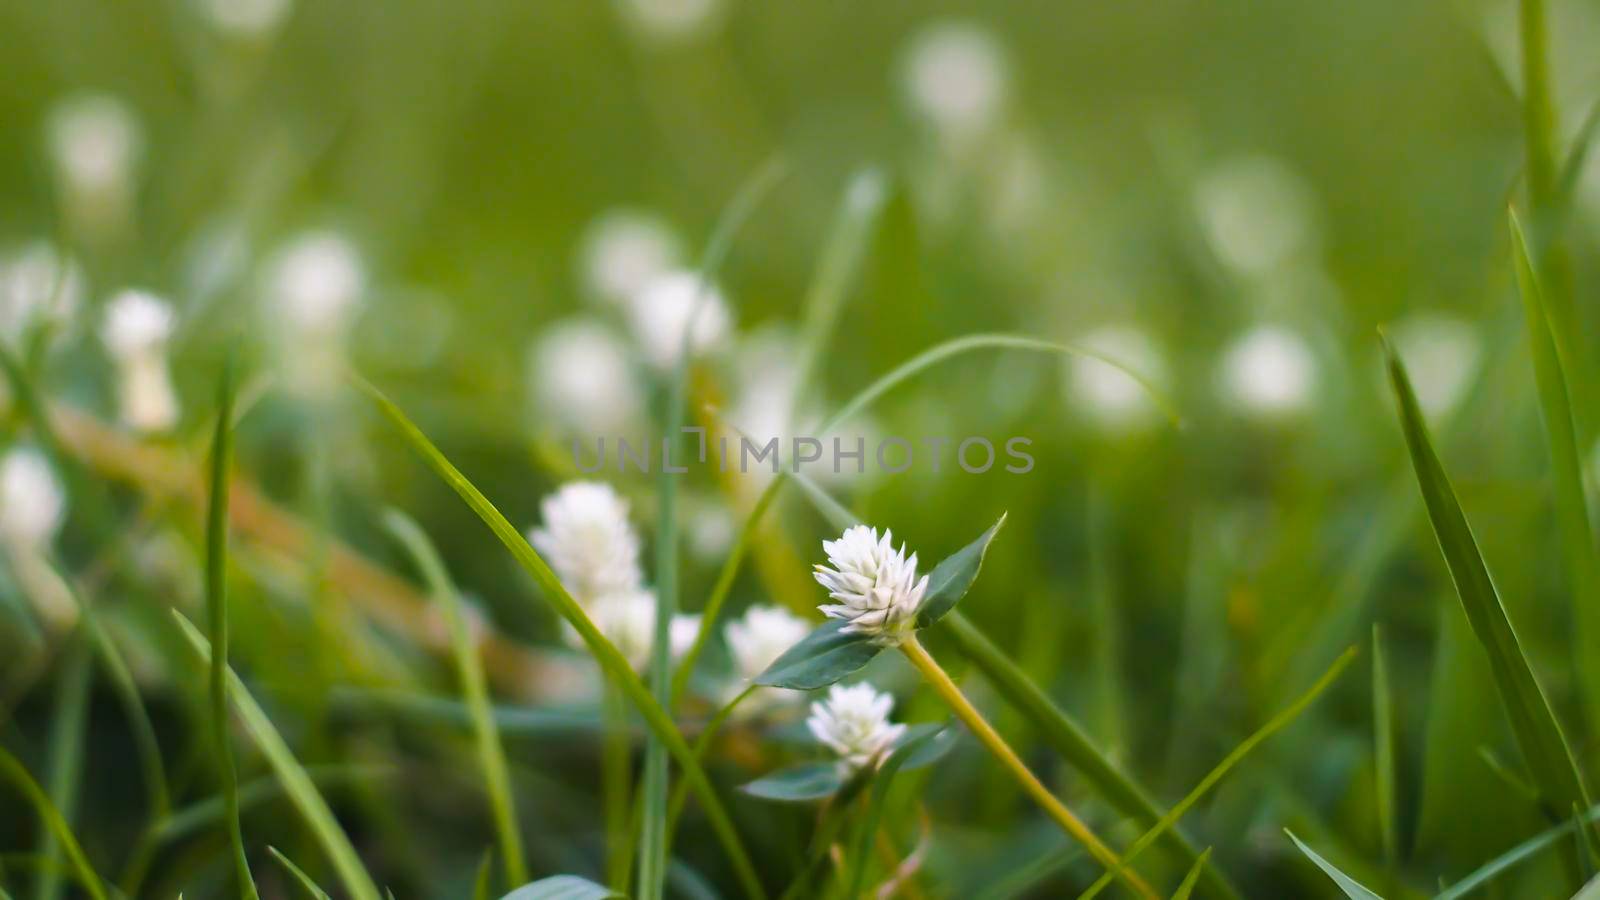 Grass pasture in grassland farming on beautiful sunny. Grass flowers with soft focus background. by Petrichor